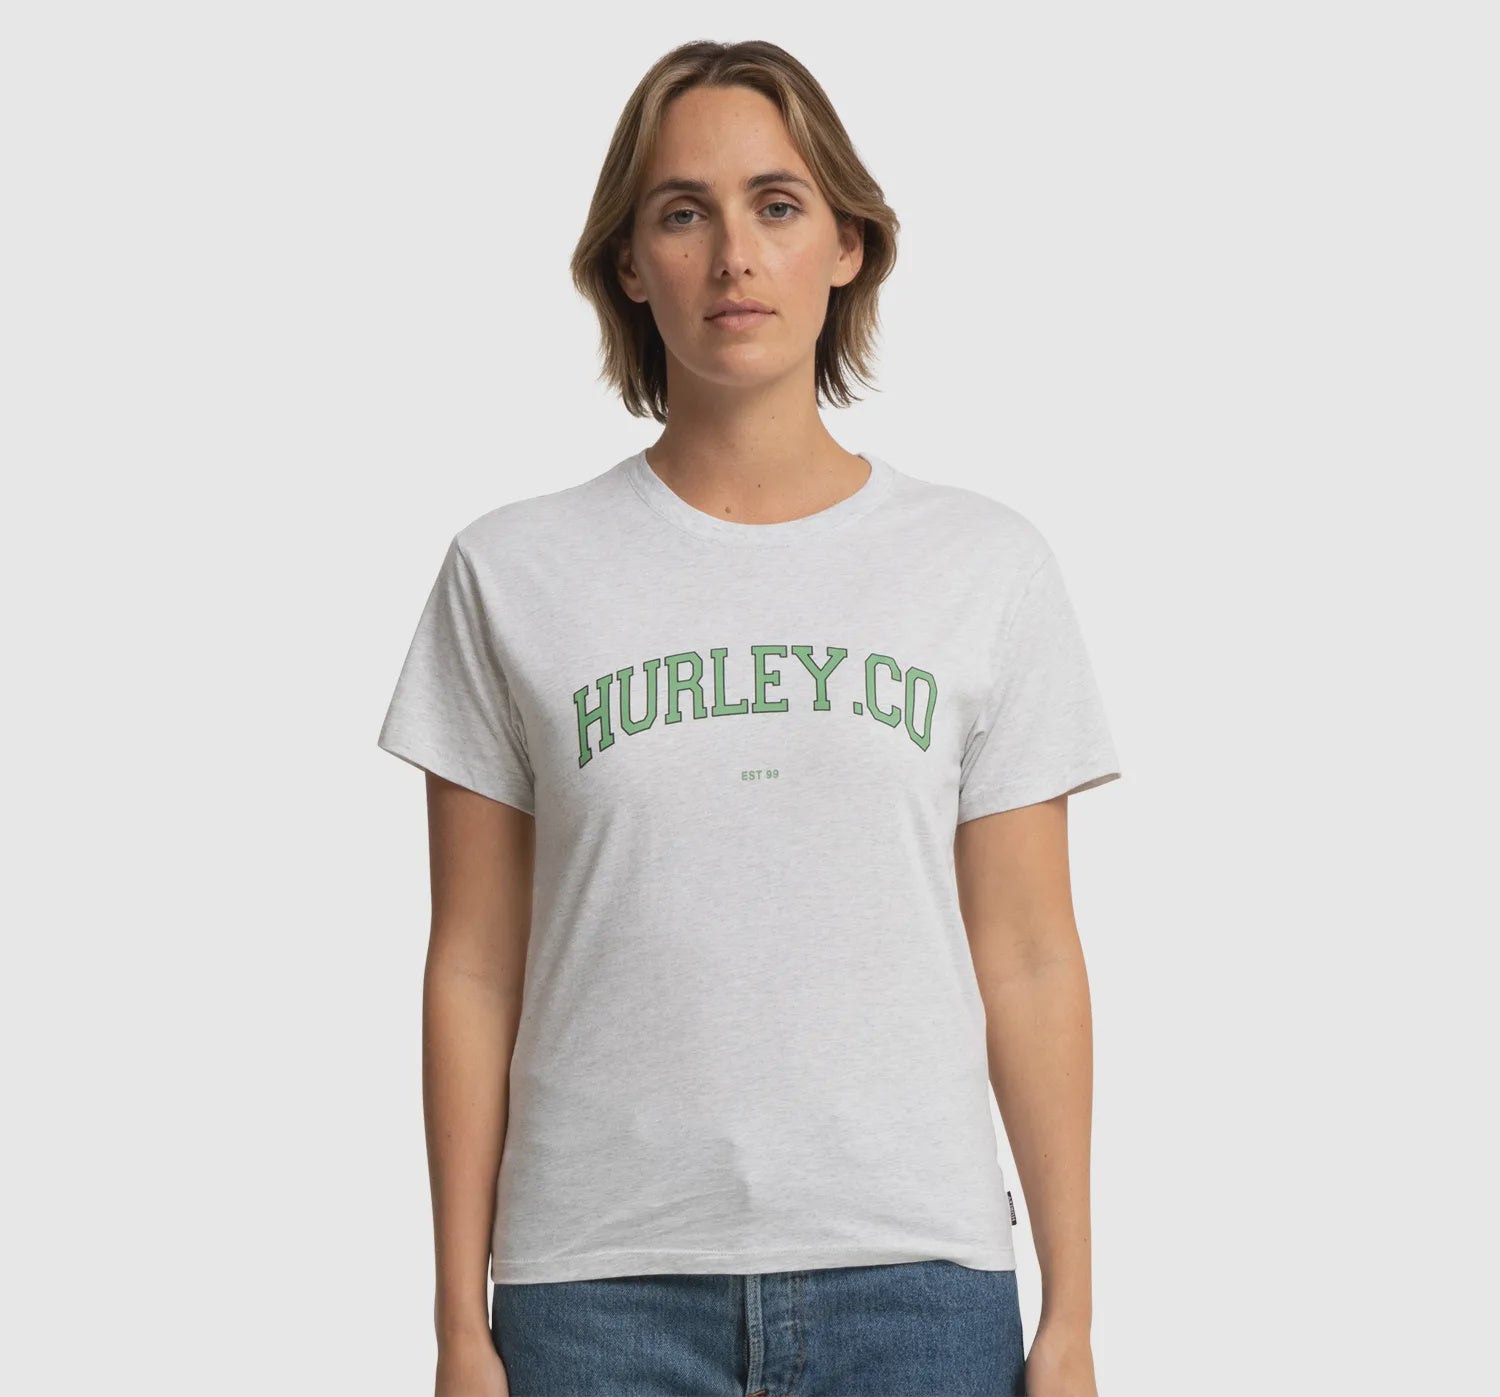 Authentic Hurley Womens T Shirt